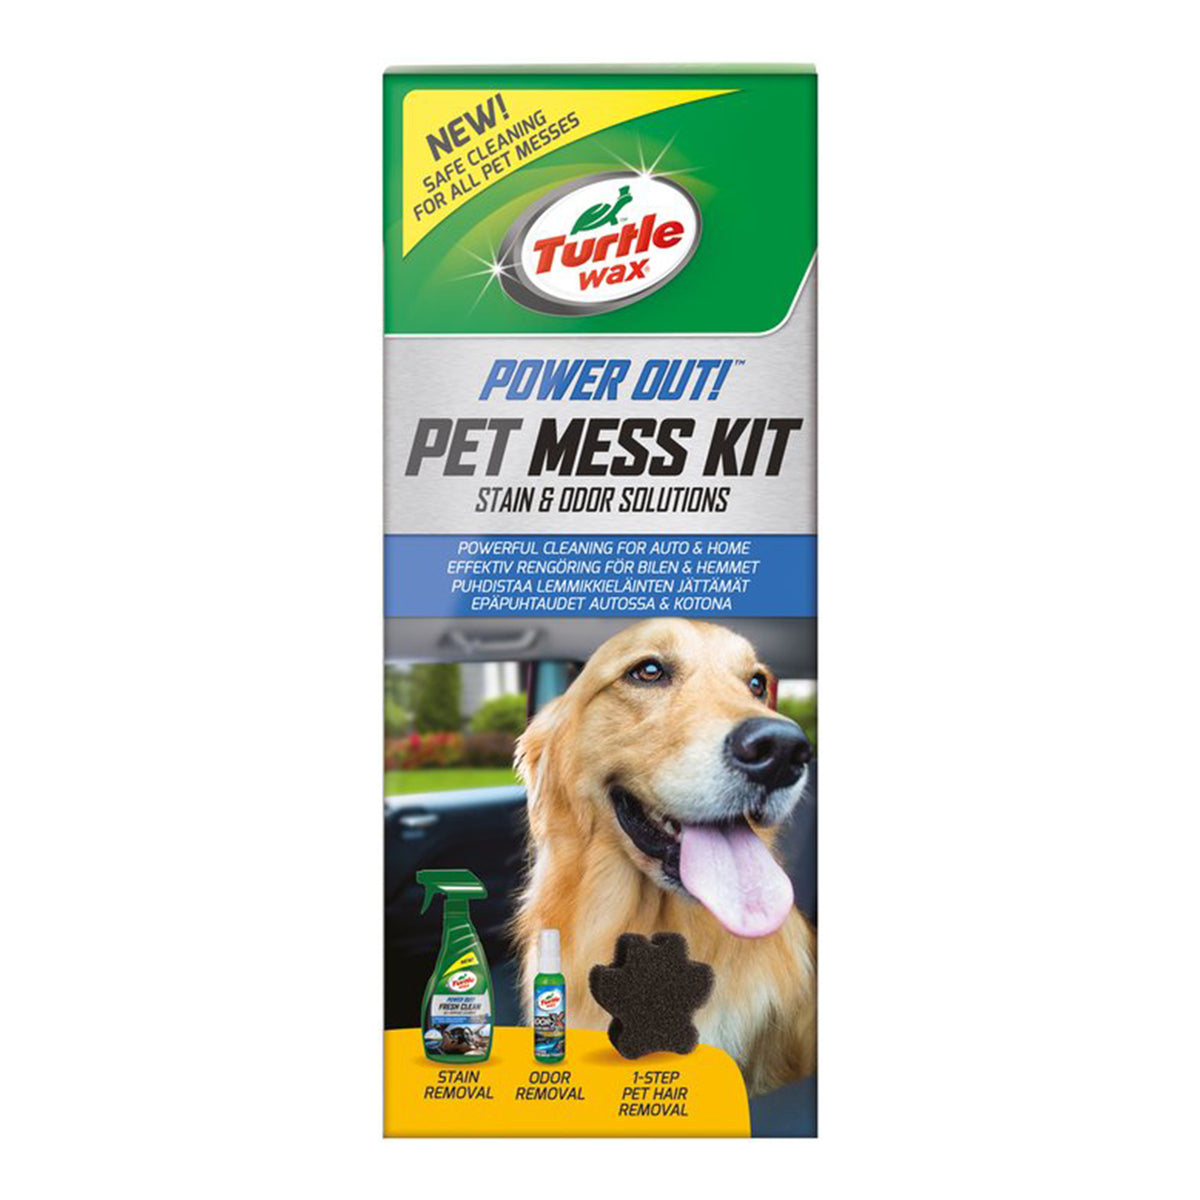 Pet mess cleaning kitHigh quality kit